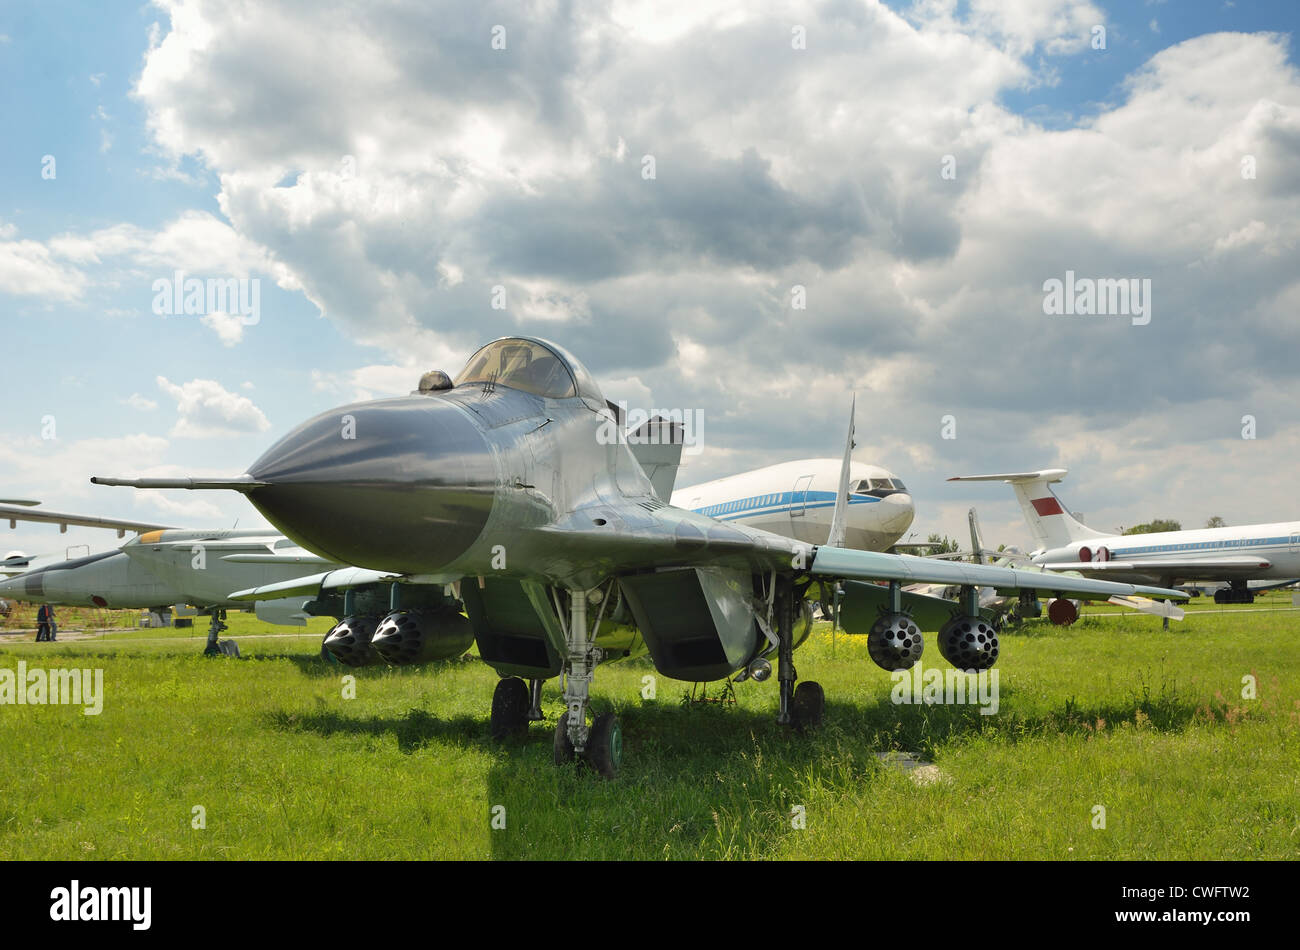 Military aircraft in the airfield Stock Photo